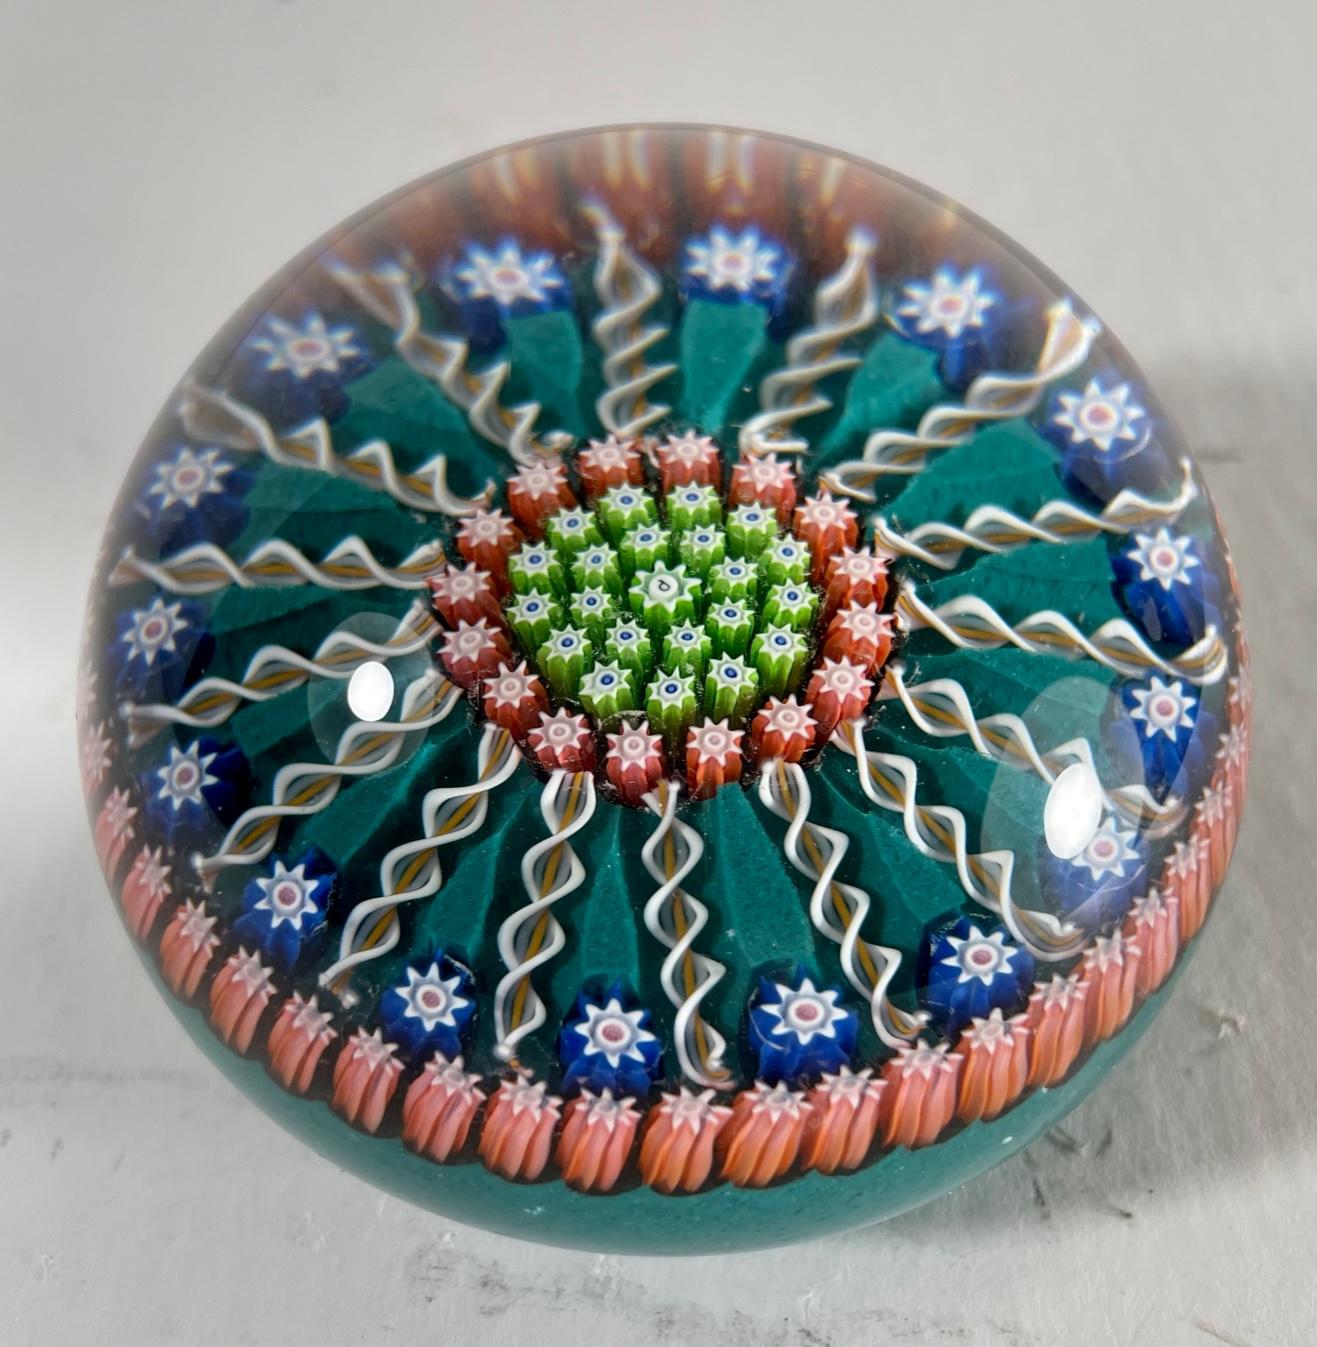 Vintage Perthshire Millefiori art glass paperweight

This vintage millefiori and twist art glass paperweight was handcrafted in Crieff, Scotland at Perthshire Paperweights, Ltd. It is designed in a pattern of colorful millefiori canes separated by